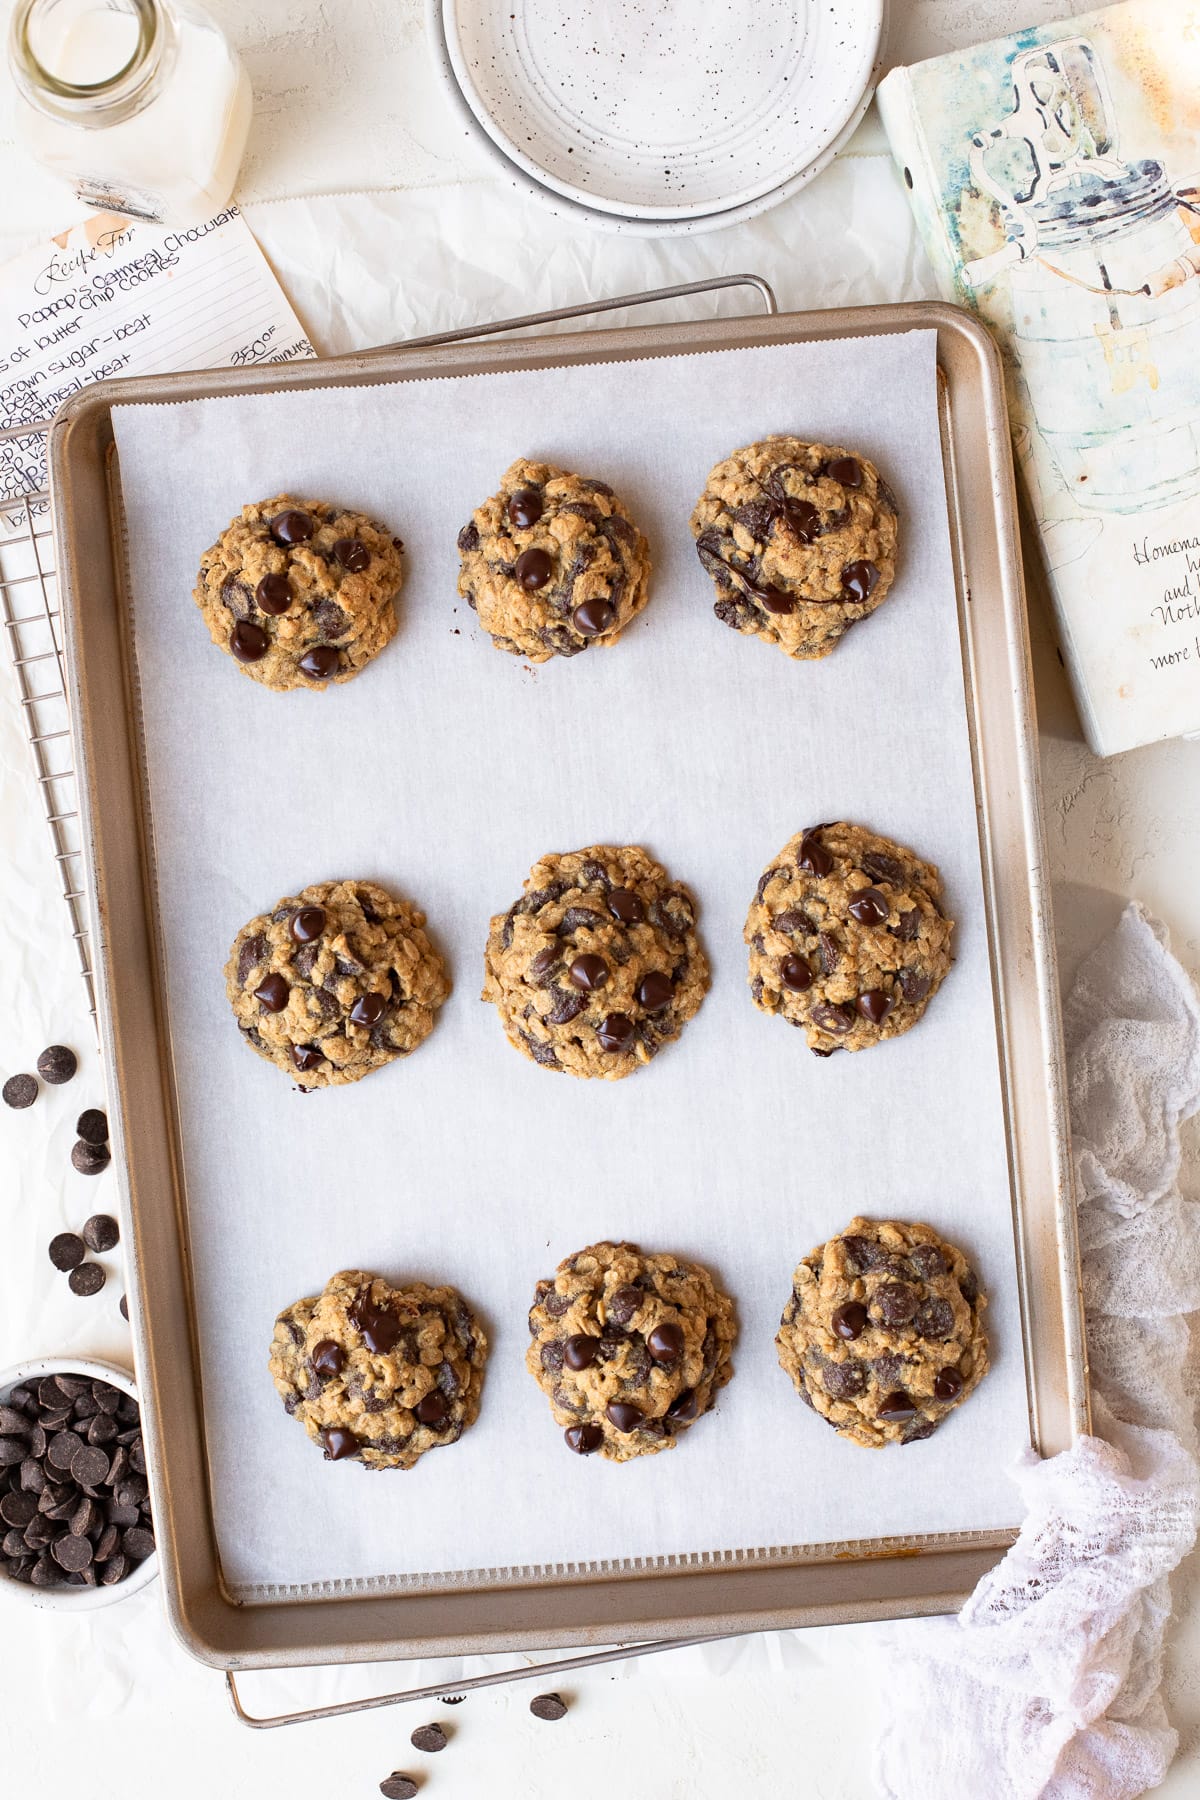 Freshly-baked oatmeal chocolate chip cookies on a parchment-lined baking sheet.